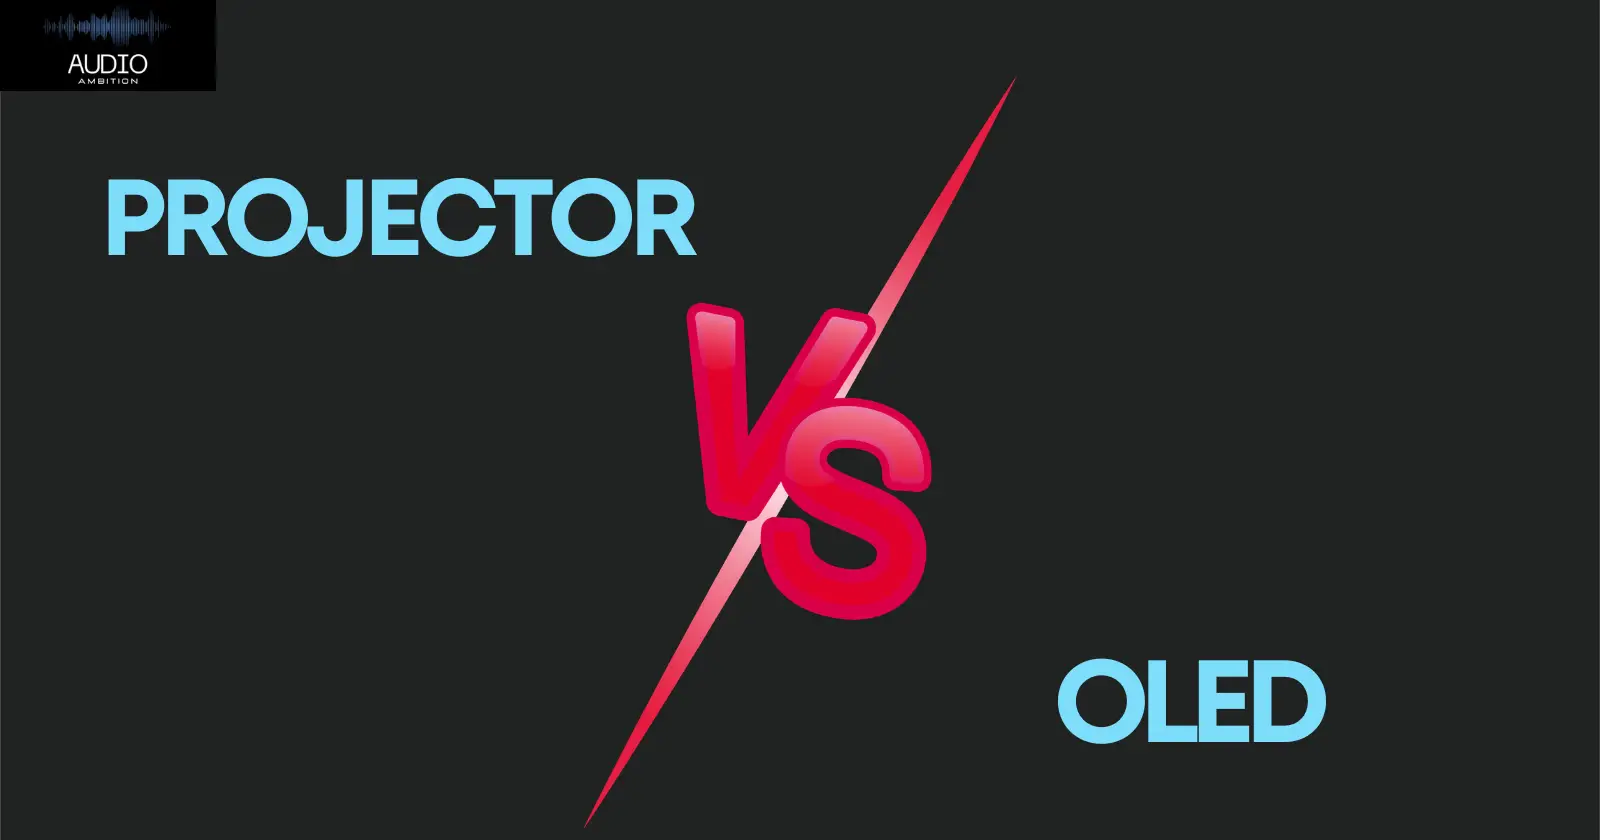 Projector vs OLED Showdown Choose Your Ultimate Visual Experience